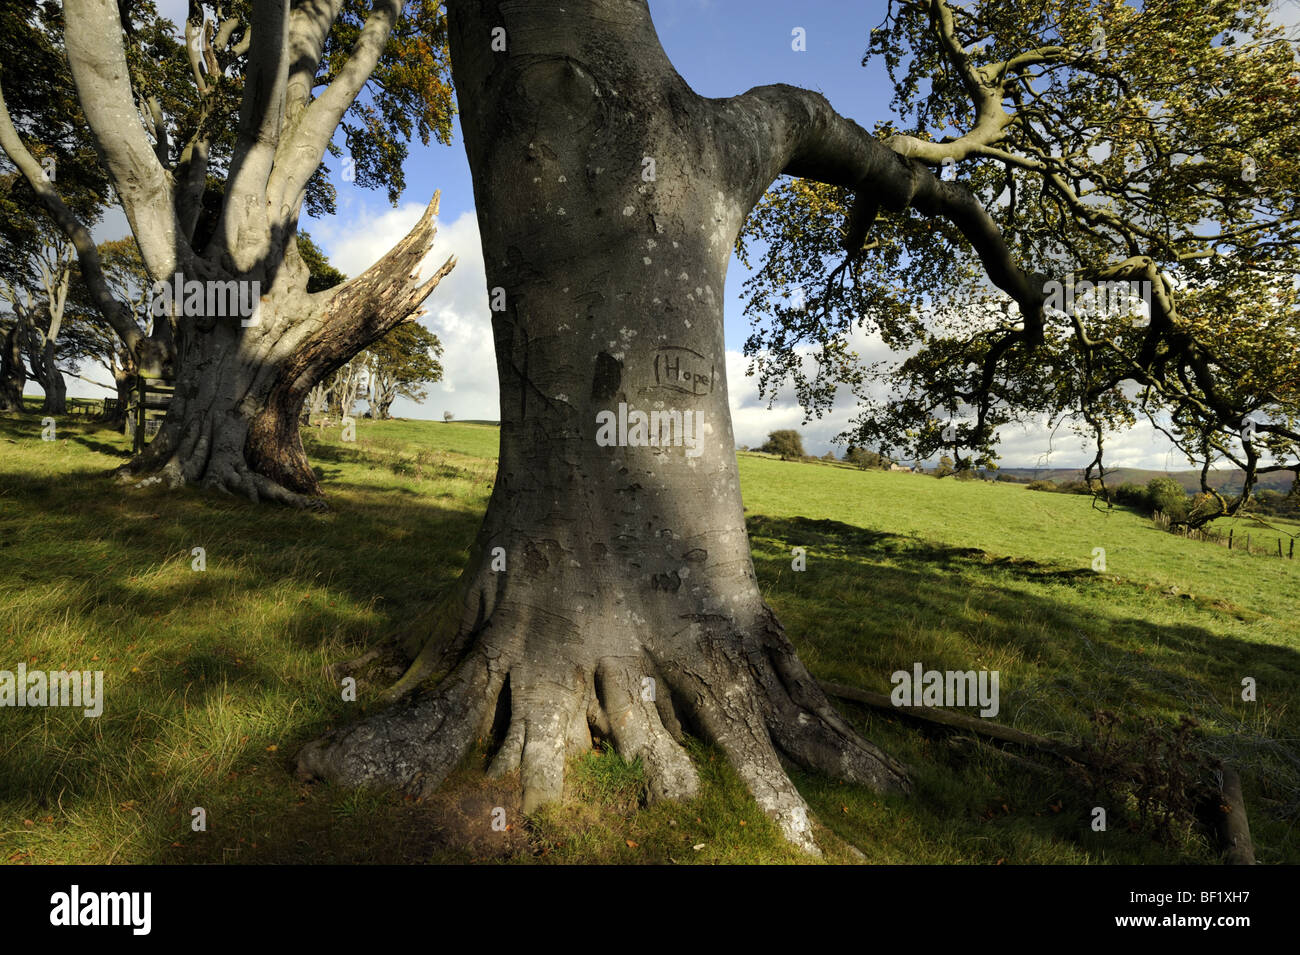 Tree with 'Hope' written on the trunk, Linley Beeches, near Church Stretton, Shropshire, England Stock Photo